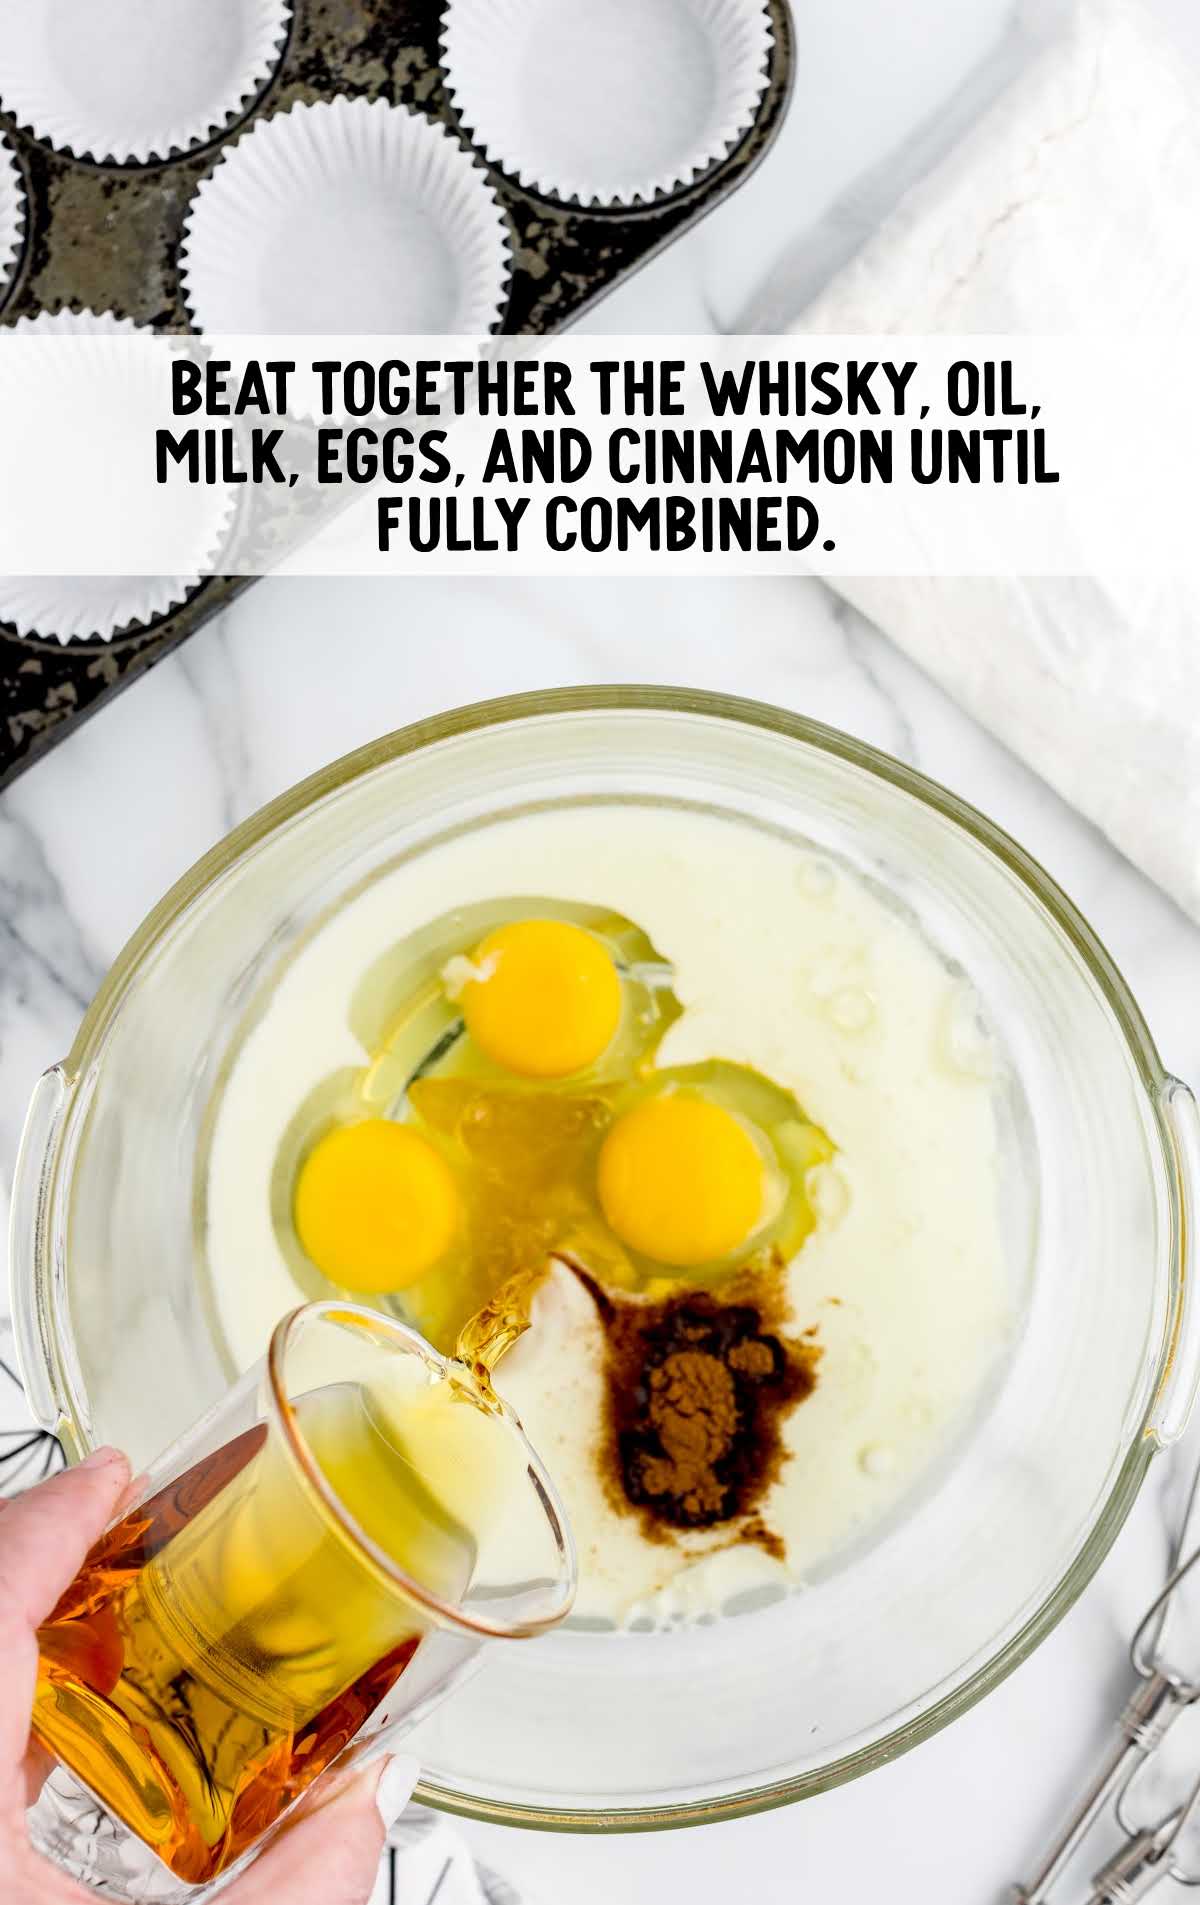 whisky, oil, milk, eggs, and cinnamon combined in a bowl